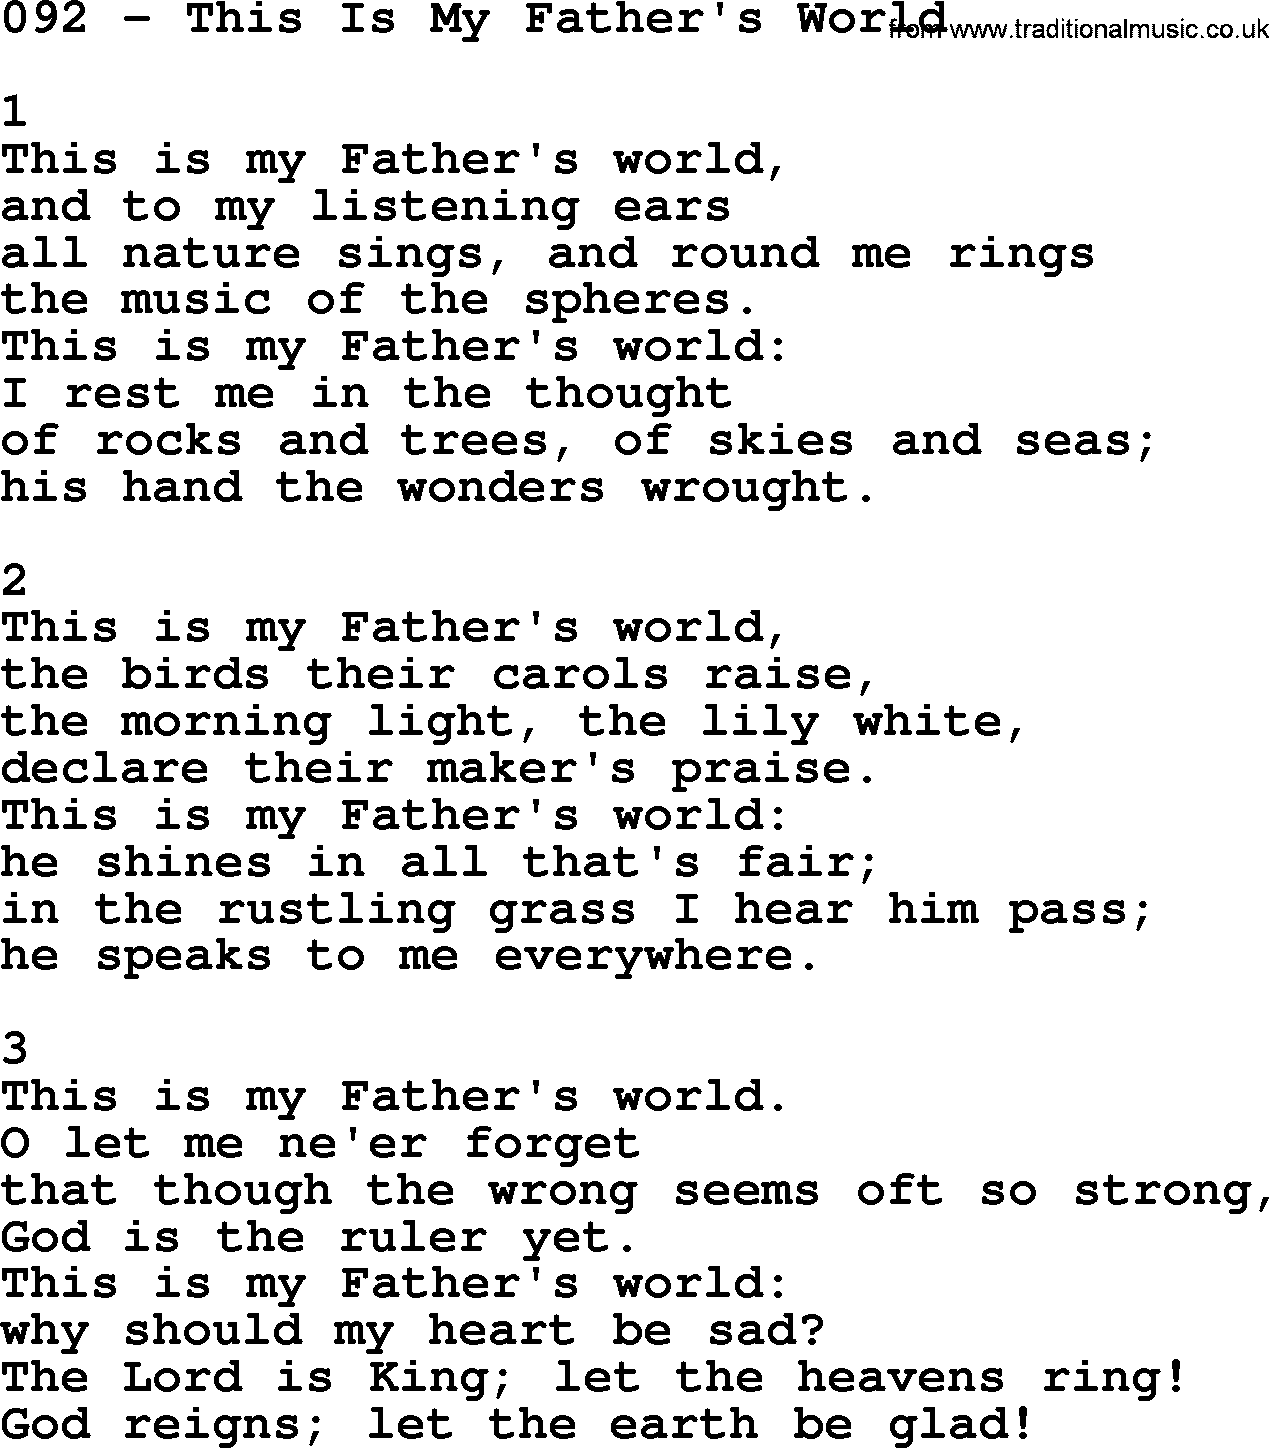 Complete Adventis Hymnal, title: 092-This Is My Father's World, with lyrics, midi, mp3, powerpoints(PPT) and PDF,